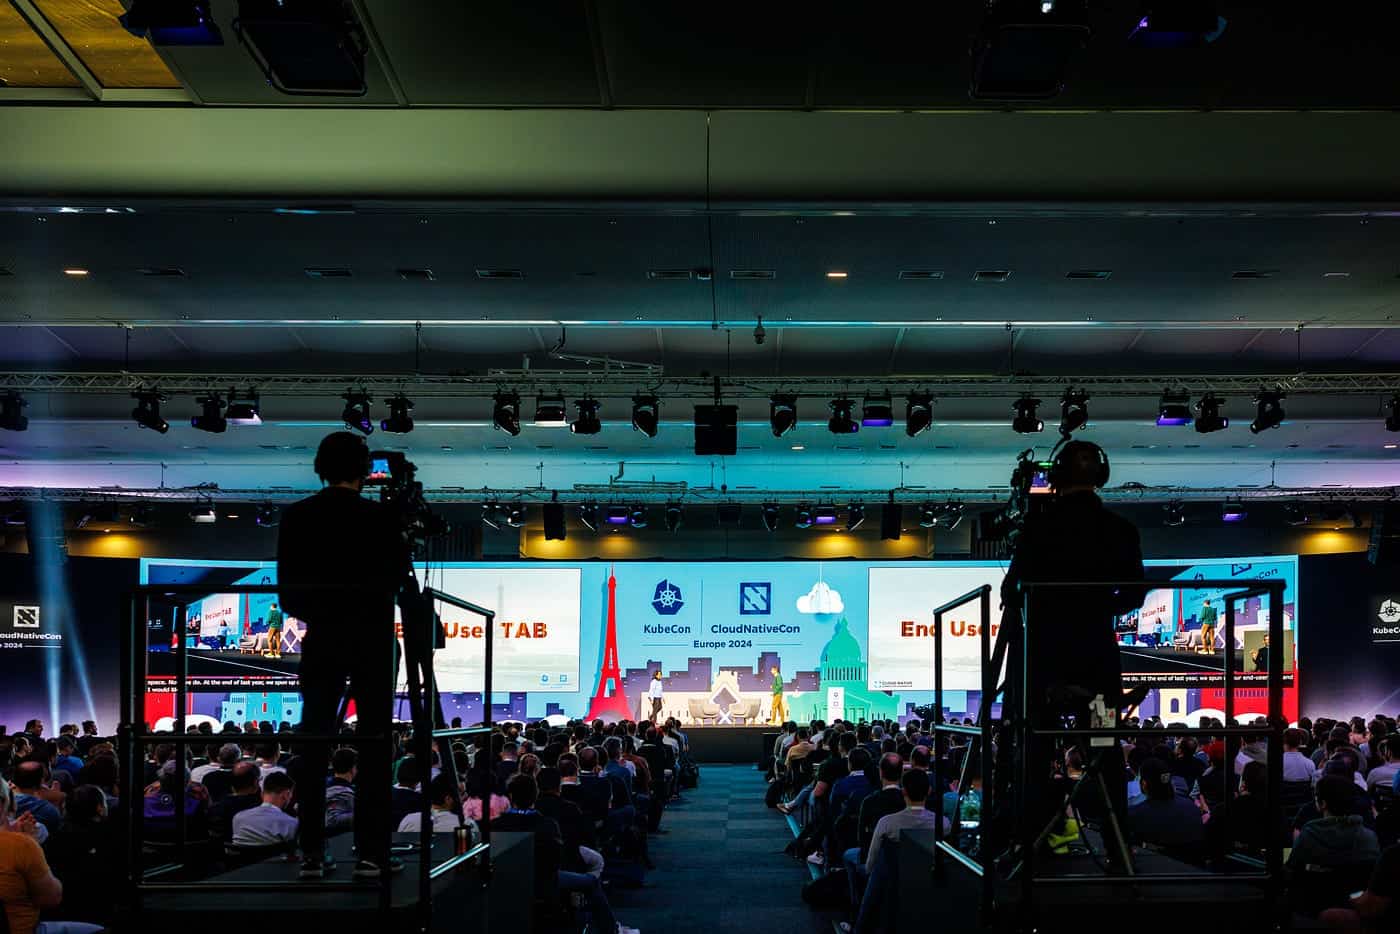 A hall filled with audiences on KubeCon CloudNativeCon Europe 2024 event